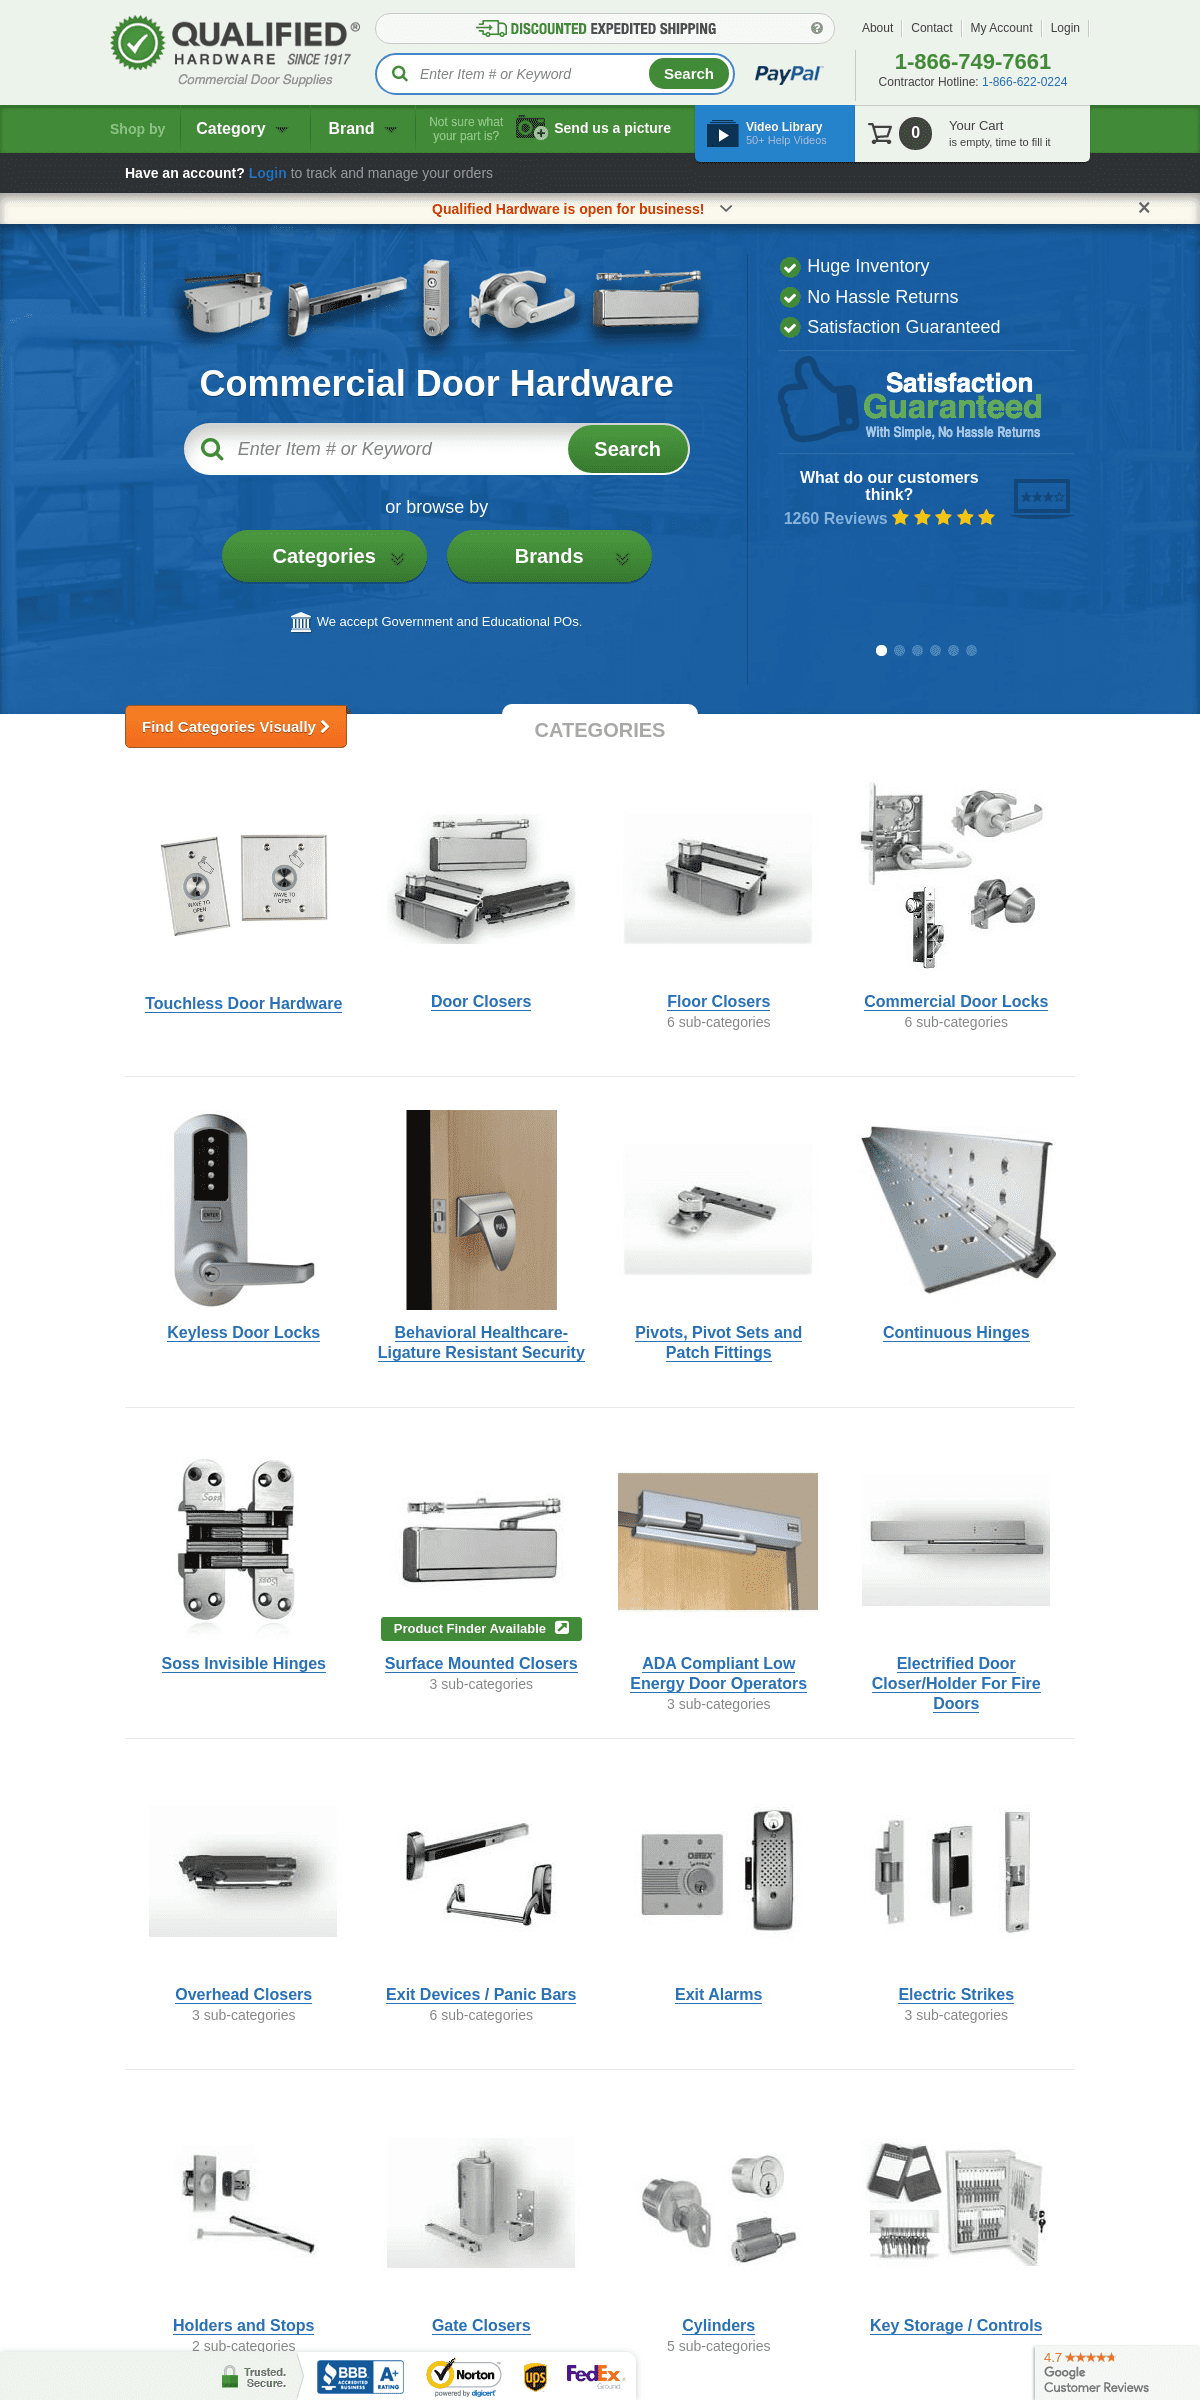 A complete backup of qualifiedhardware.com